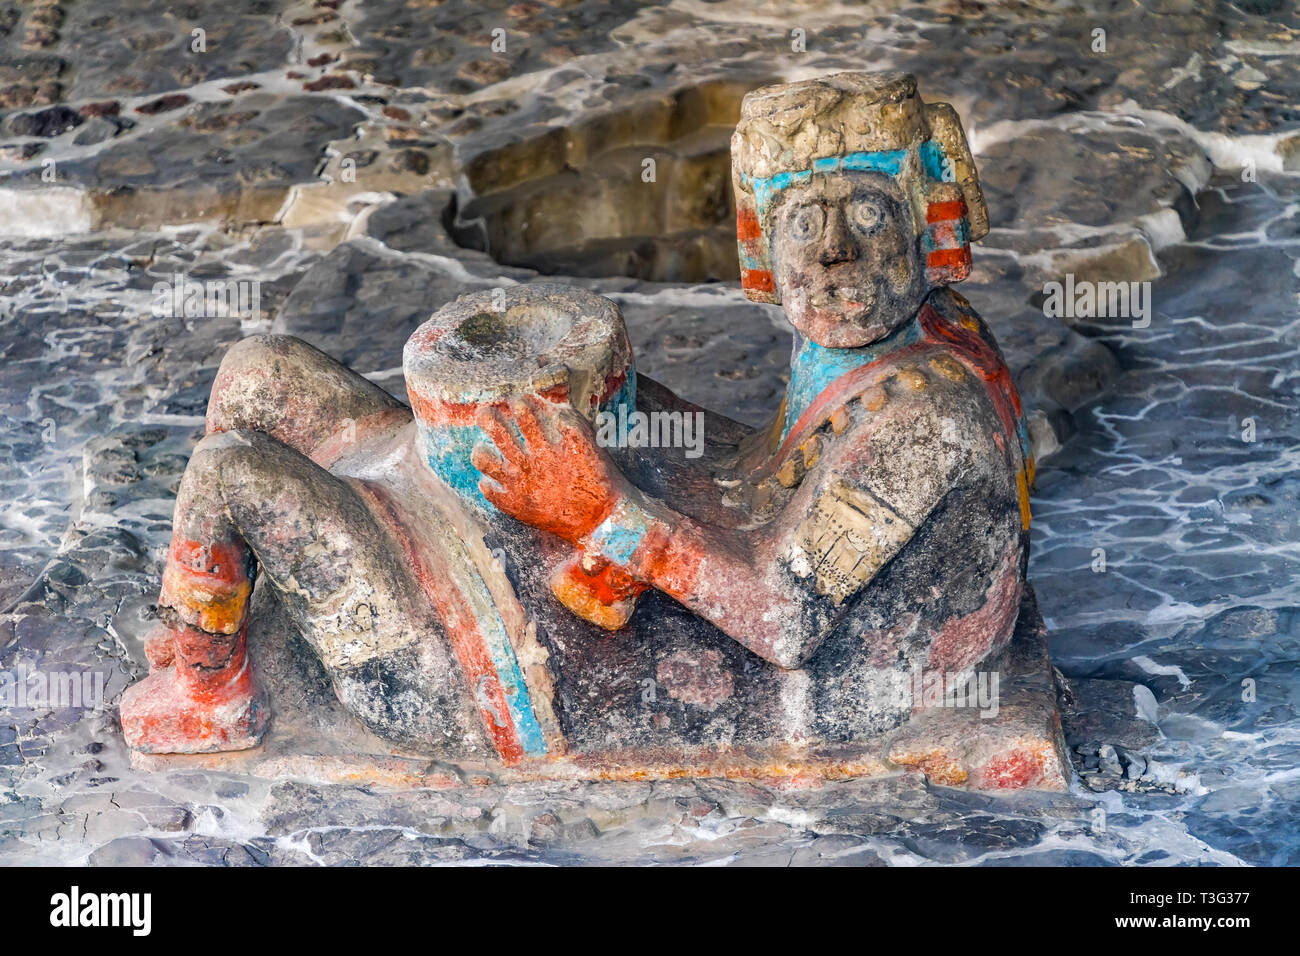 Ancient Aztec Chacool Offering Stone Statue Used Offerings Templo Mayor Mexico City Mexico. Great Aztec Temple created 1325 to 1521 Stock Photo